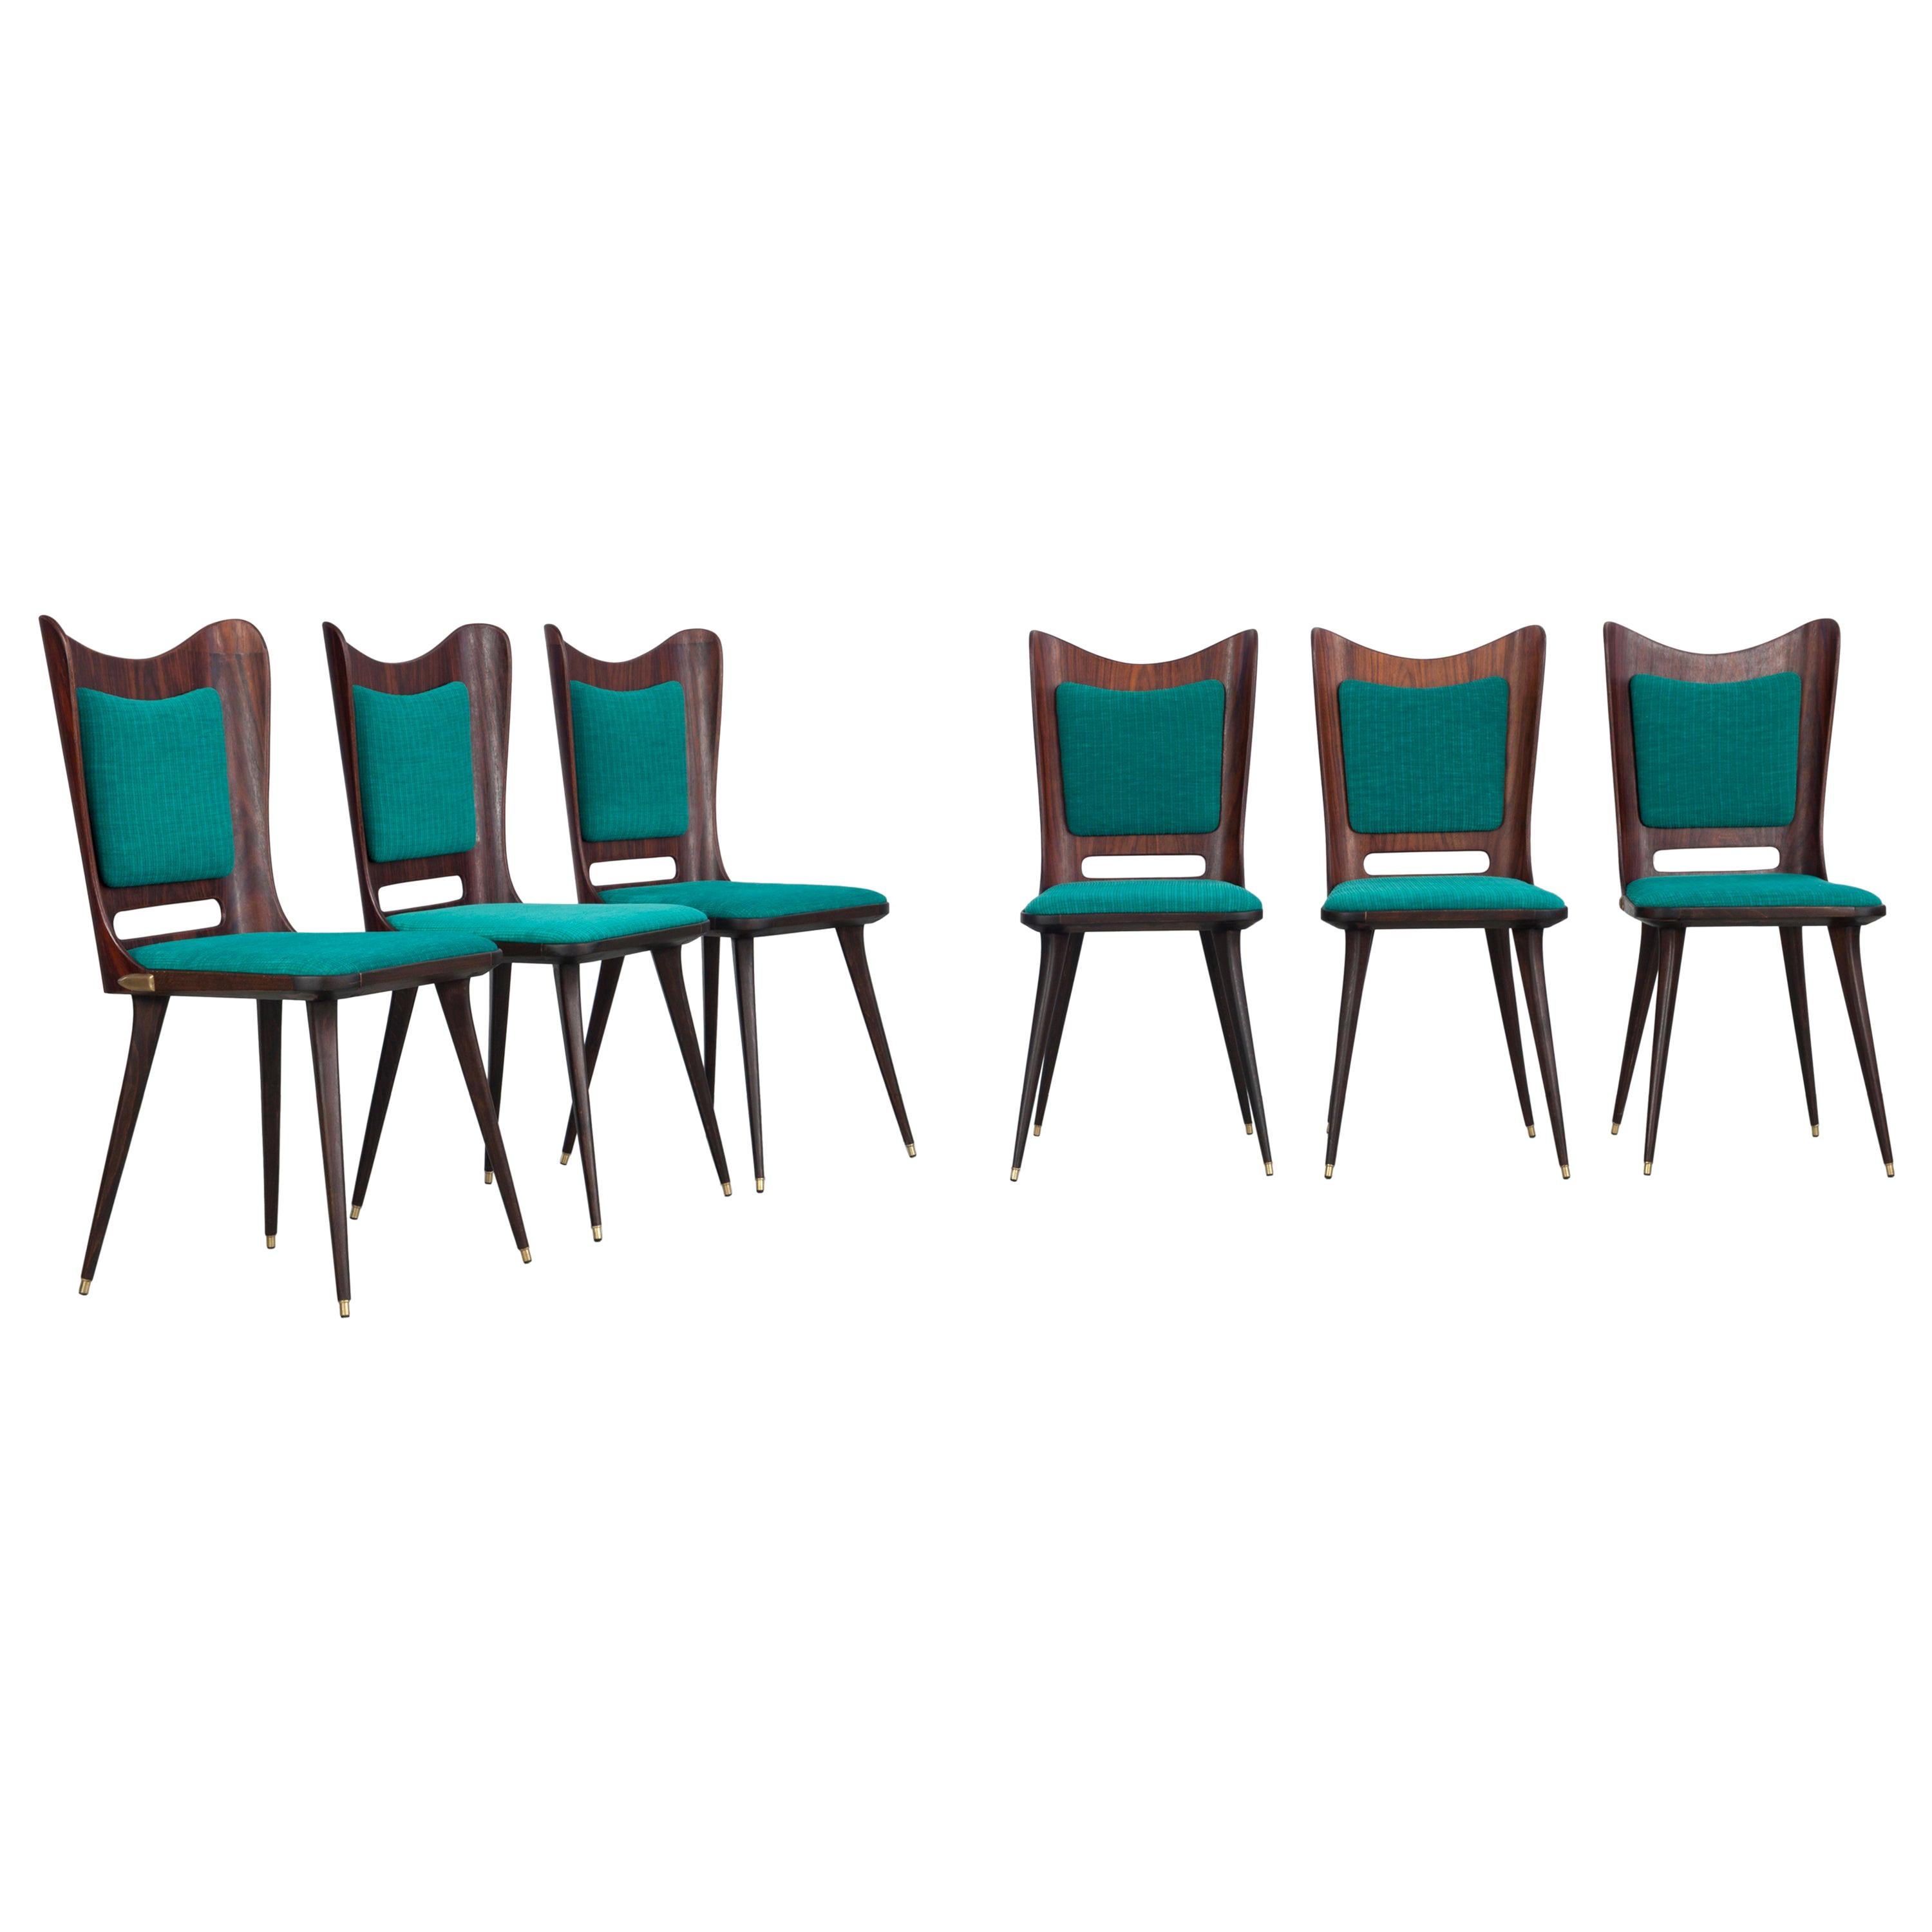 Set of Six Wooden Dining Chairs with Green Upholstery, 1950s